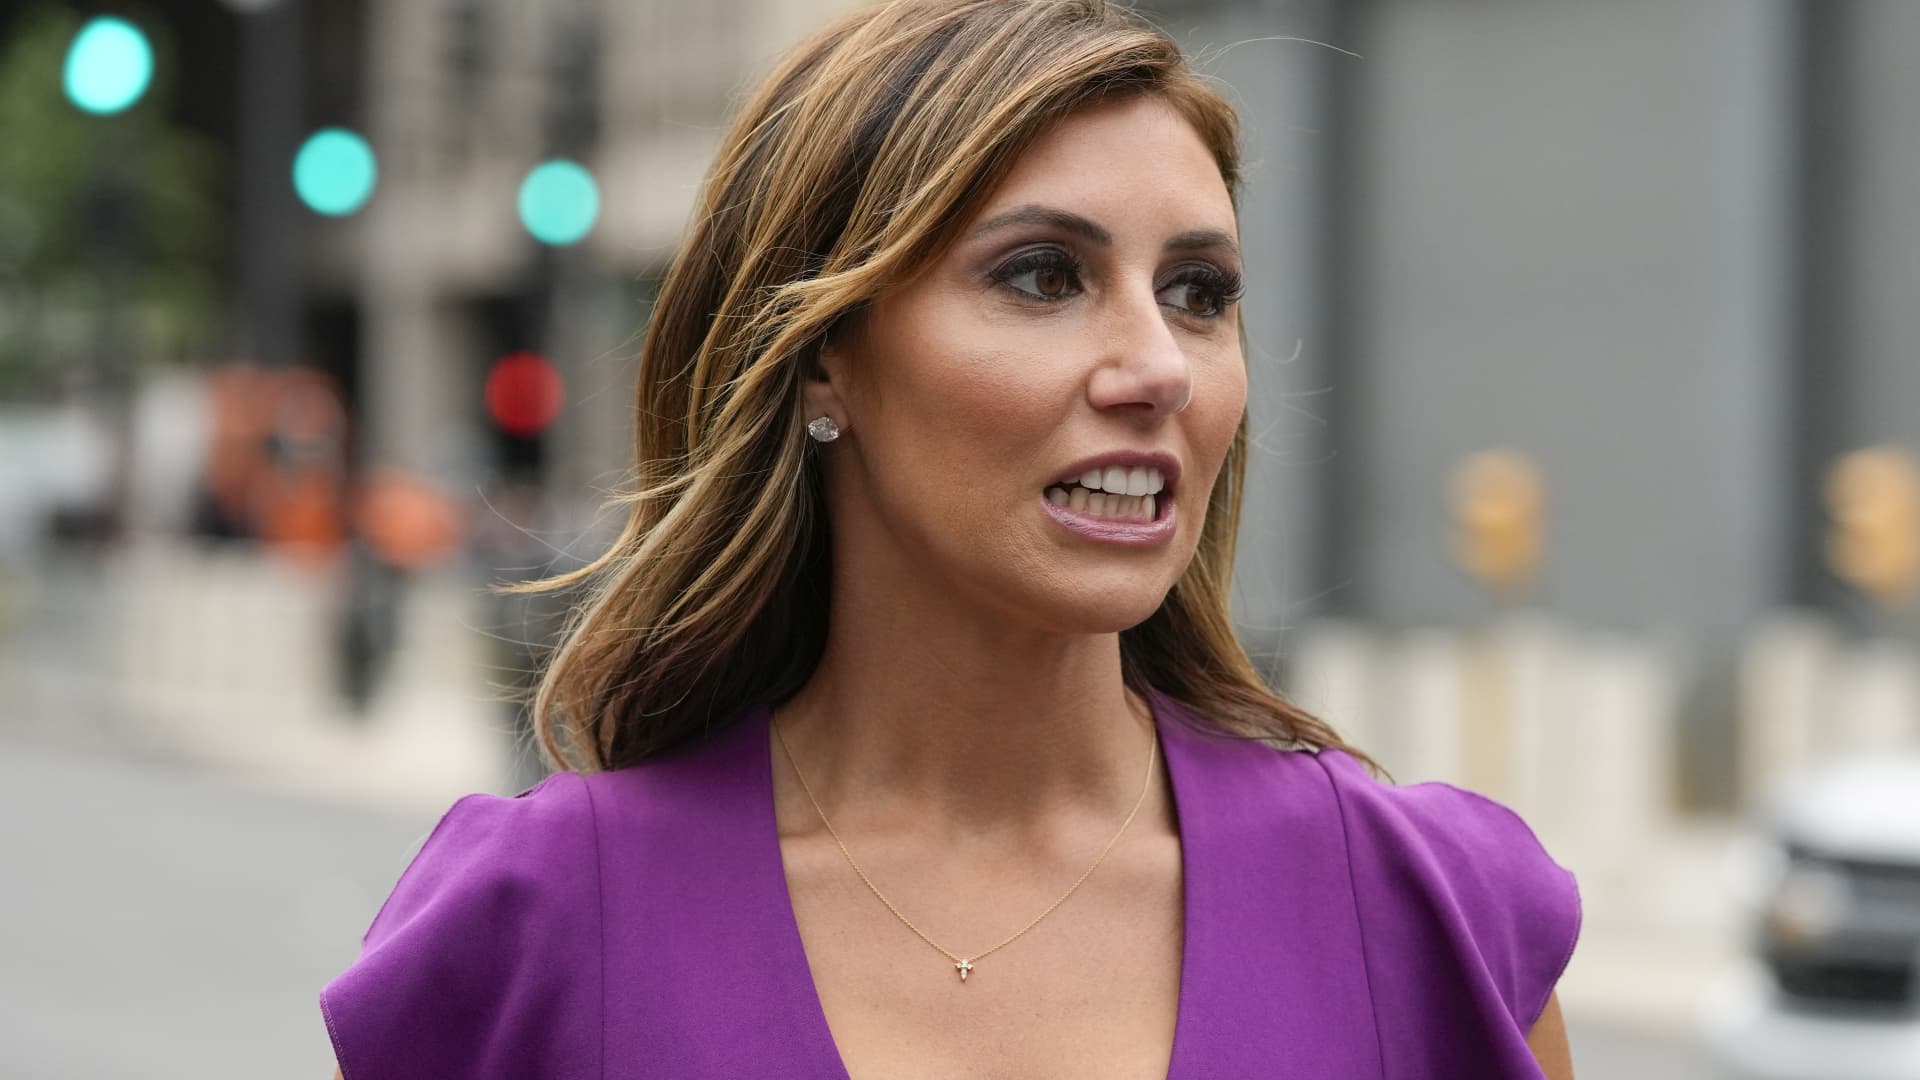 Alina Habba, a lawyer for former President Donald Trump, speaks after Trump arrived at the E. Barrett Prettyman U.S. Federal Courthouse, Thursday, Aug. 3, 2023, in Washington, to face a judge on federal conspiracy charges alleging Trump conspired to subvert the 2020 election.